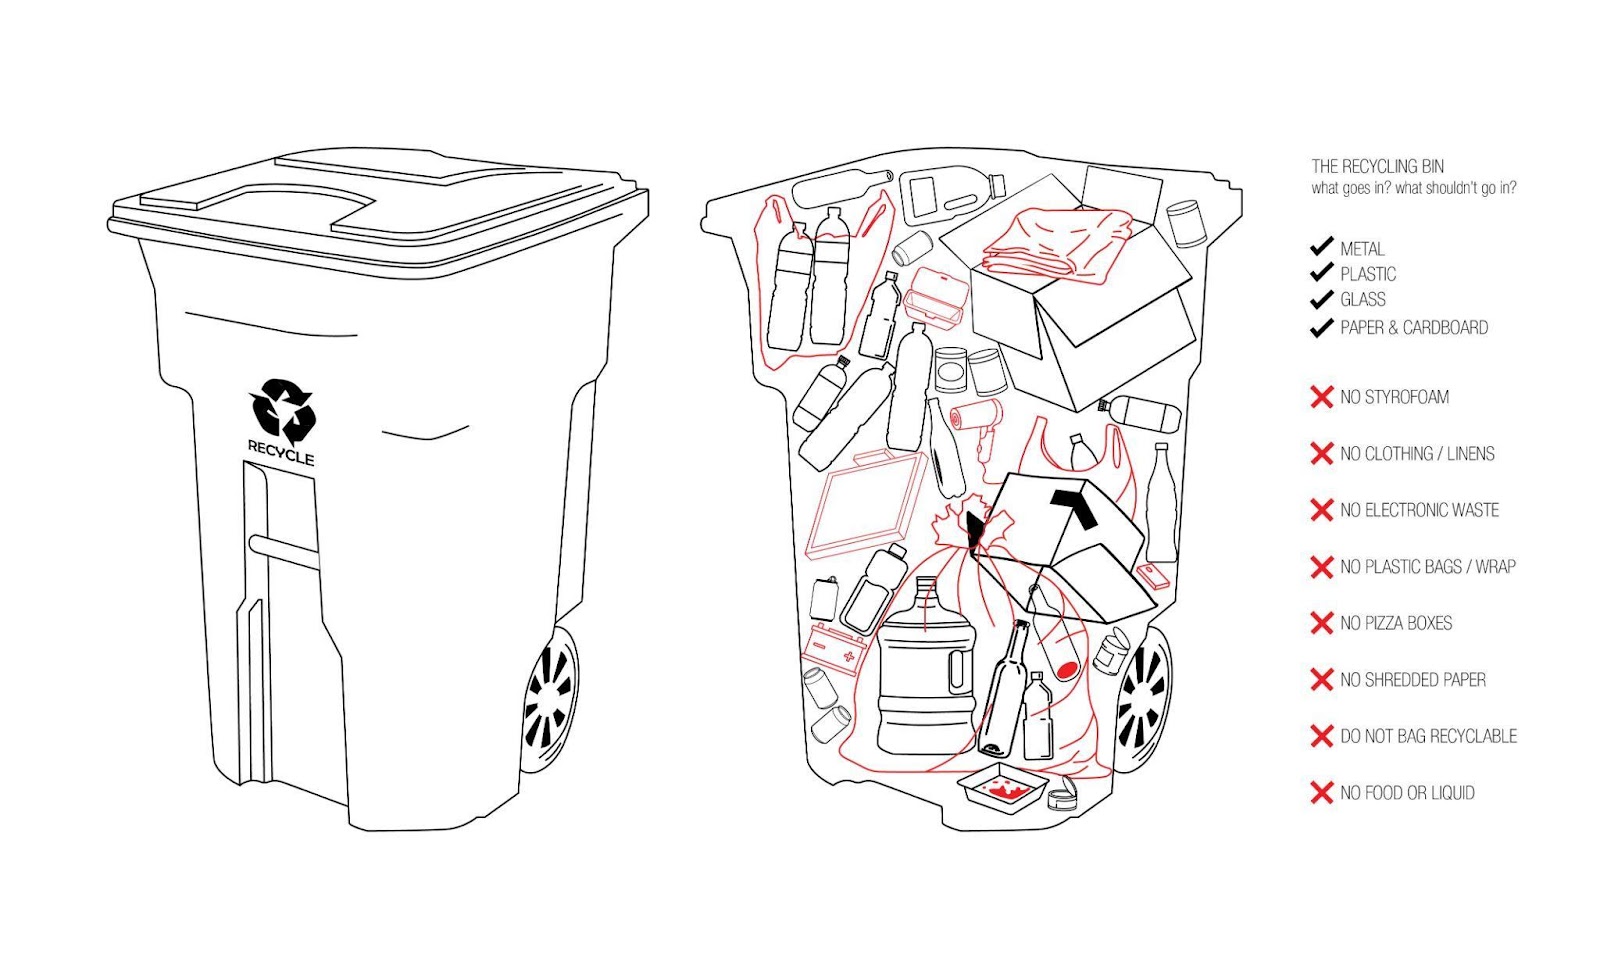 An illustration showing two recycling bins, one illustrated to show the outside of the bin, and the second filled with outlines of a variety of objects. Objects with a black outline are able to be recycled: Metal, plastic, glass, paper, and cardboard. Objects with a red outline are not able to be recycled: Styrofoam, clothing/linens, electronic waste, plastic bags/wrap, pizza boxes, shredded paper, food and liquids. It also tells you not to bag recyclables. 